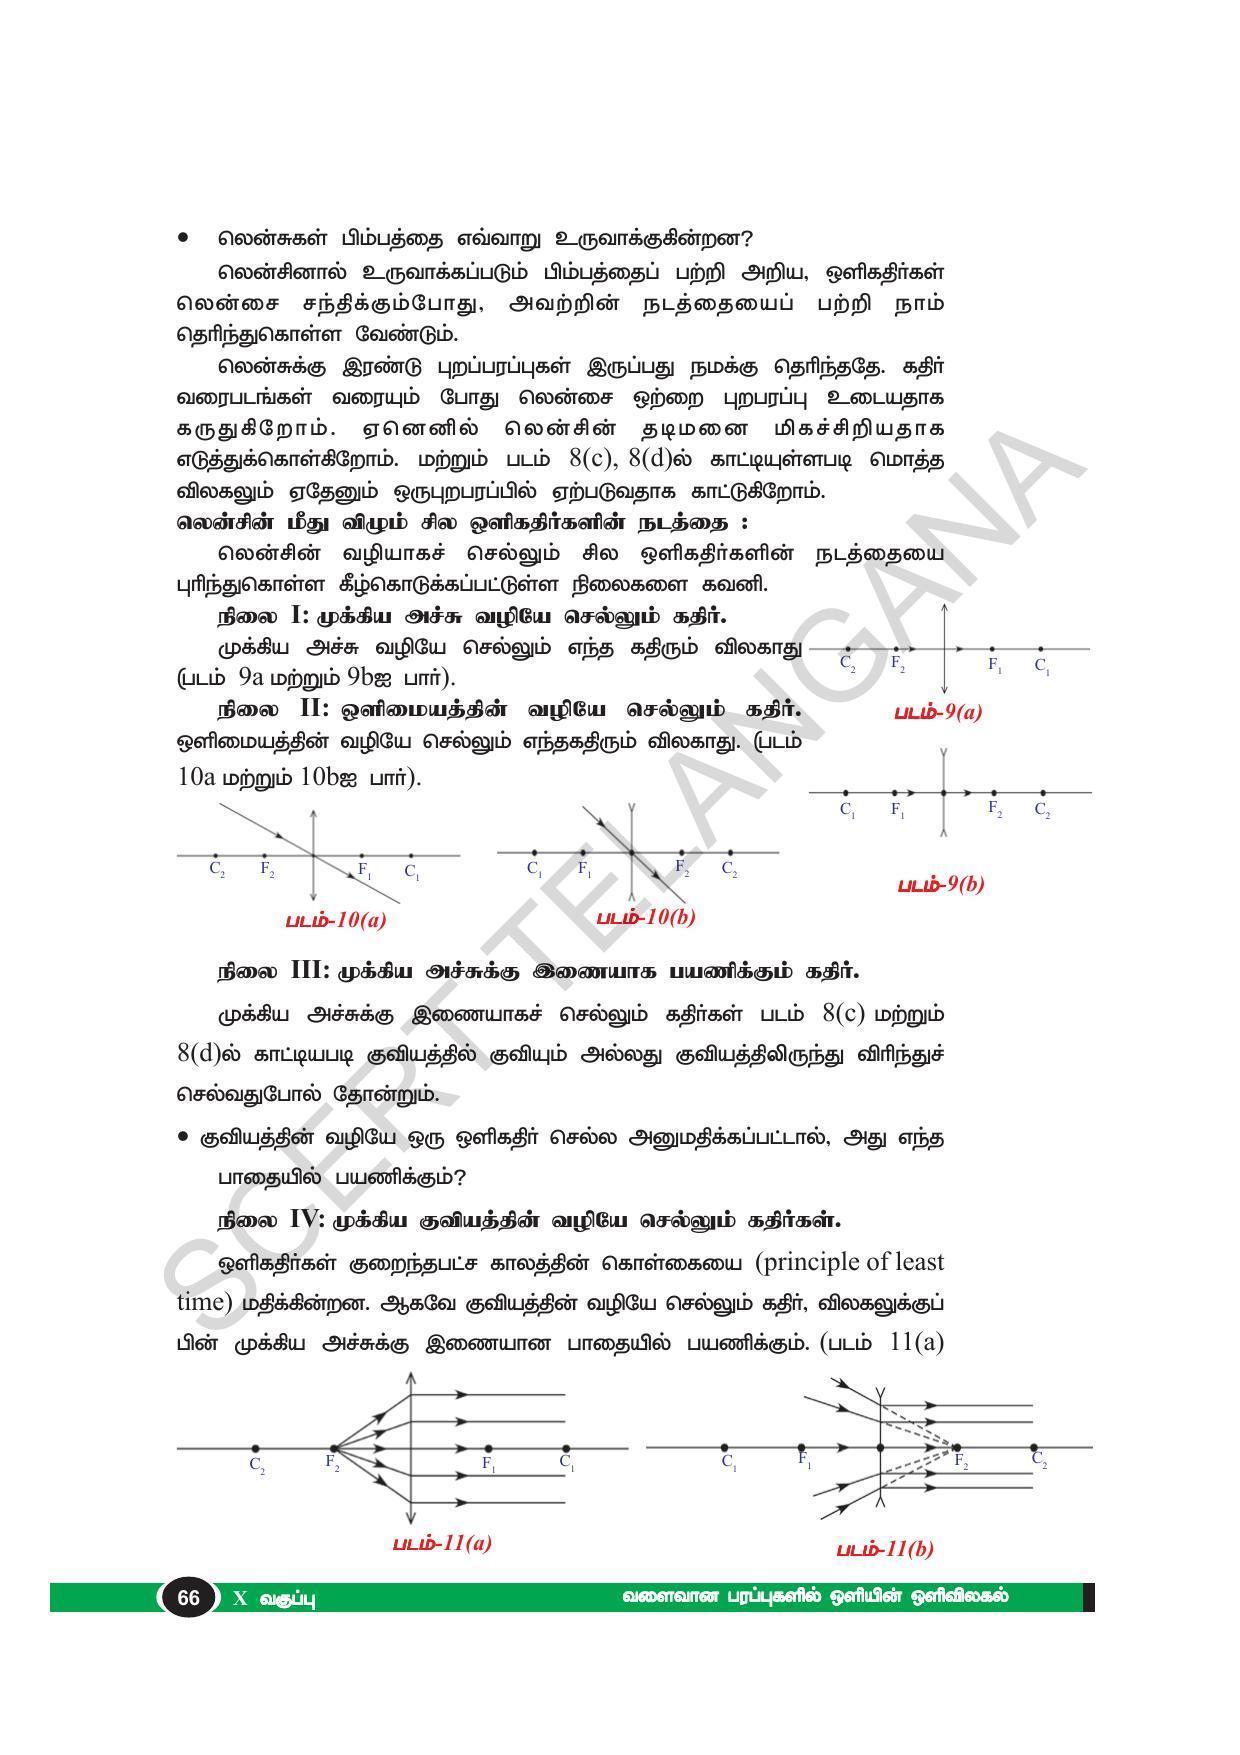 TS SCERT Class 10 Physical Science(Tamil Medium) Text Book - Page 78